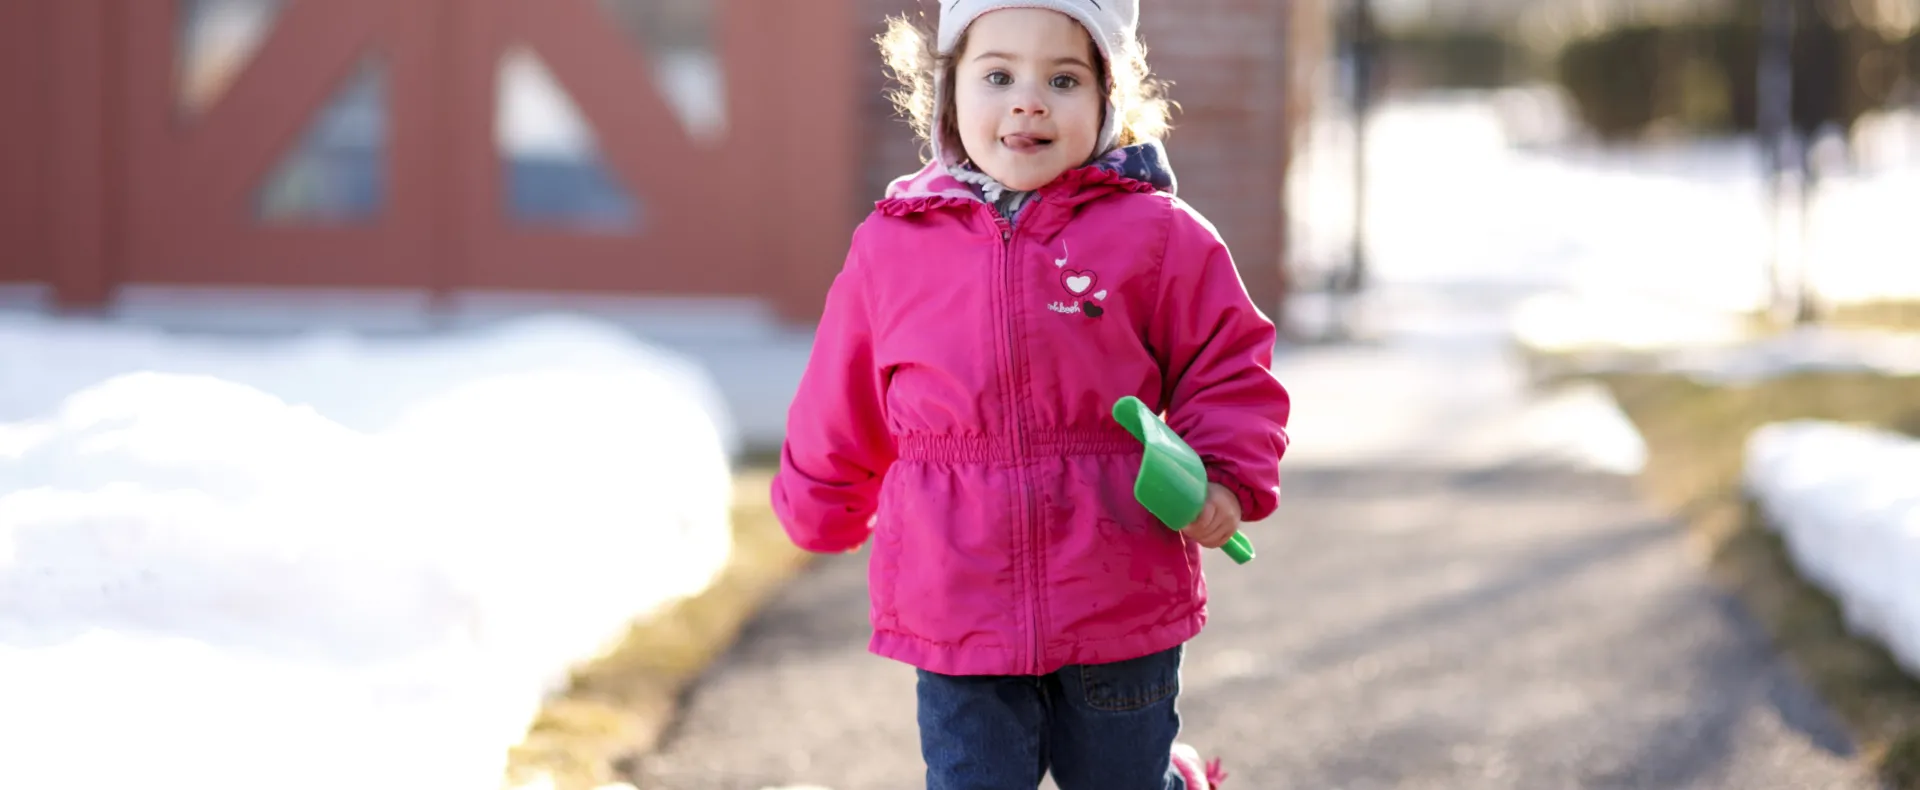 Girl running outside on a snowy day